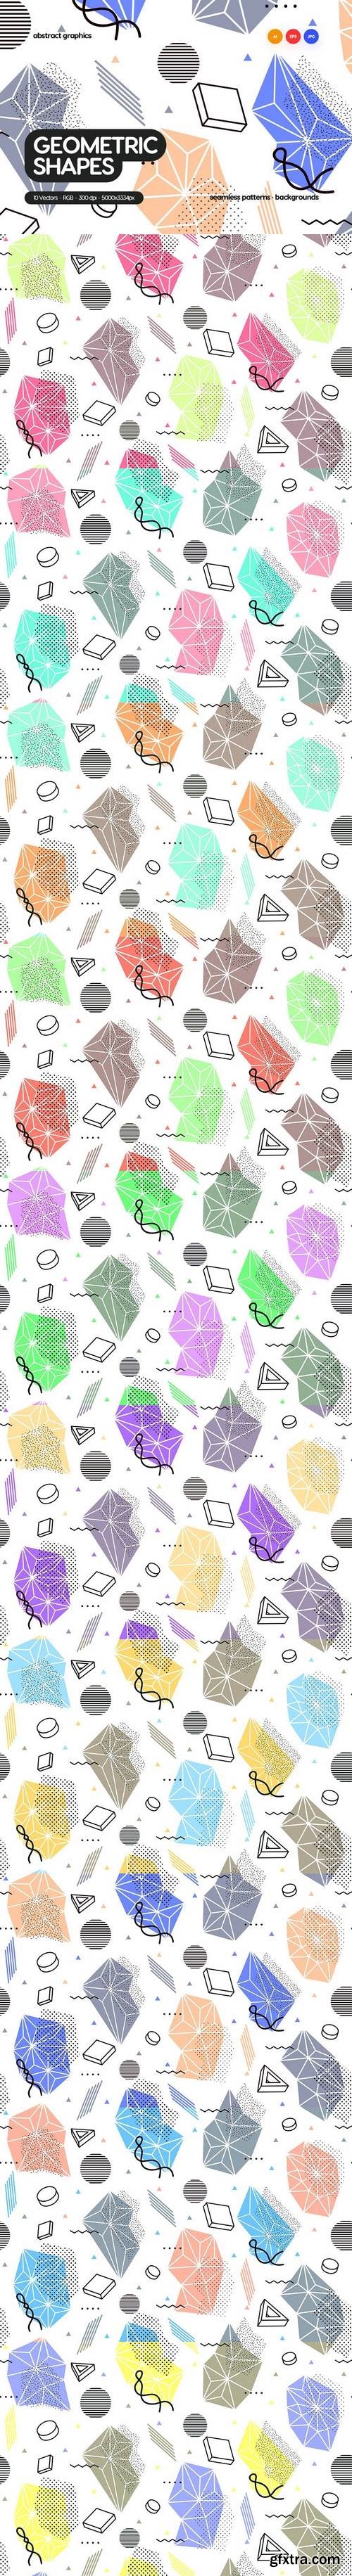 Seamless Patterns of Geometric Shapes Backgrounds